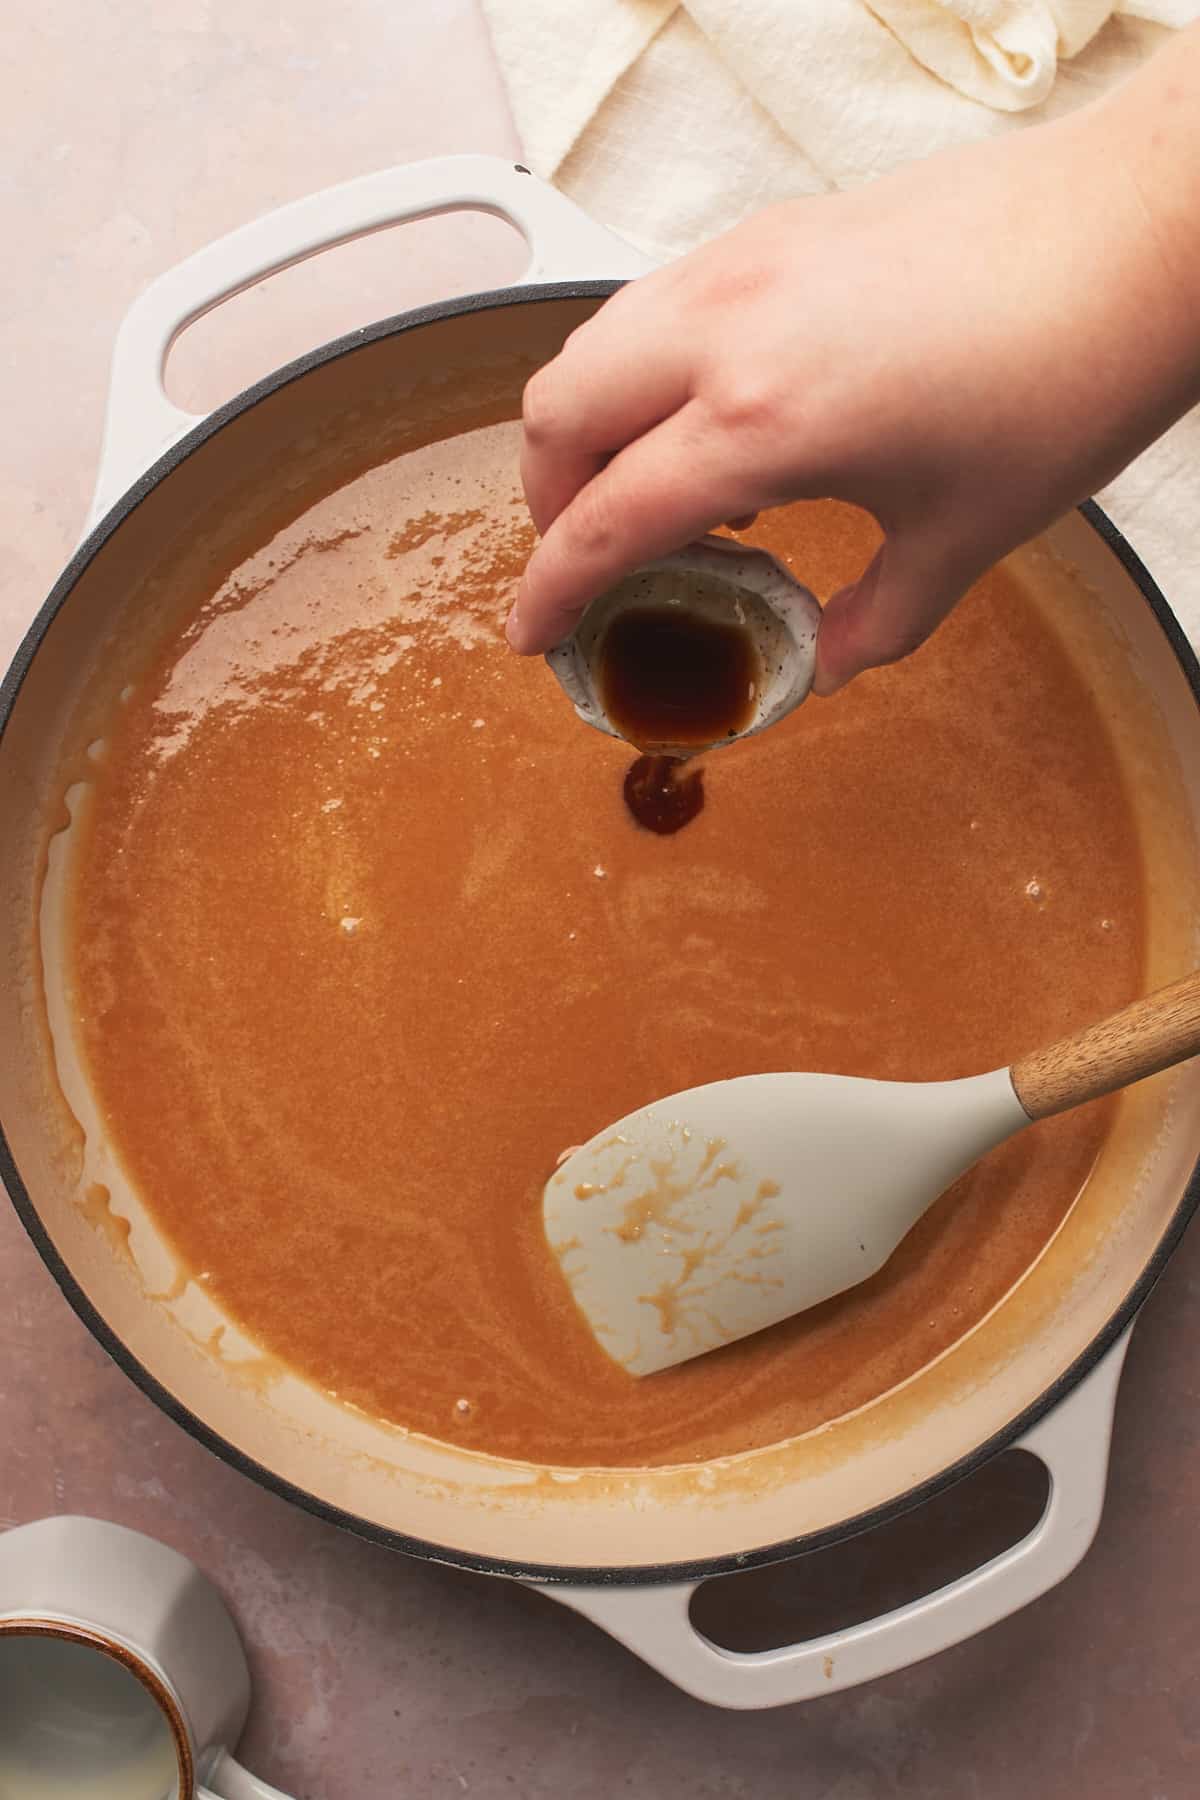 hand pouring vanilla extract into an enameled cast iron skillet full of caramel sauce.